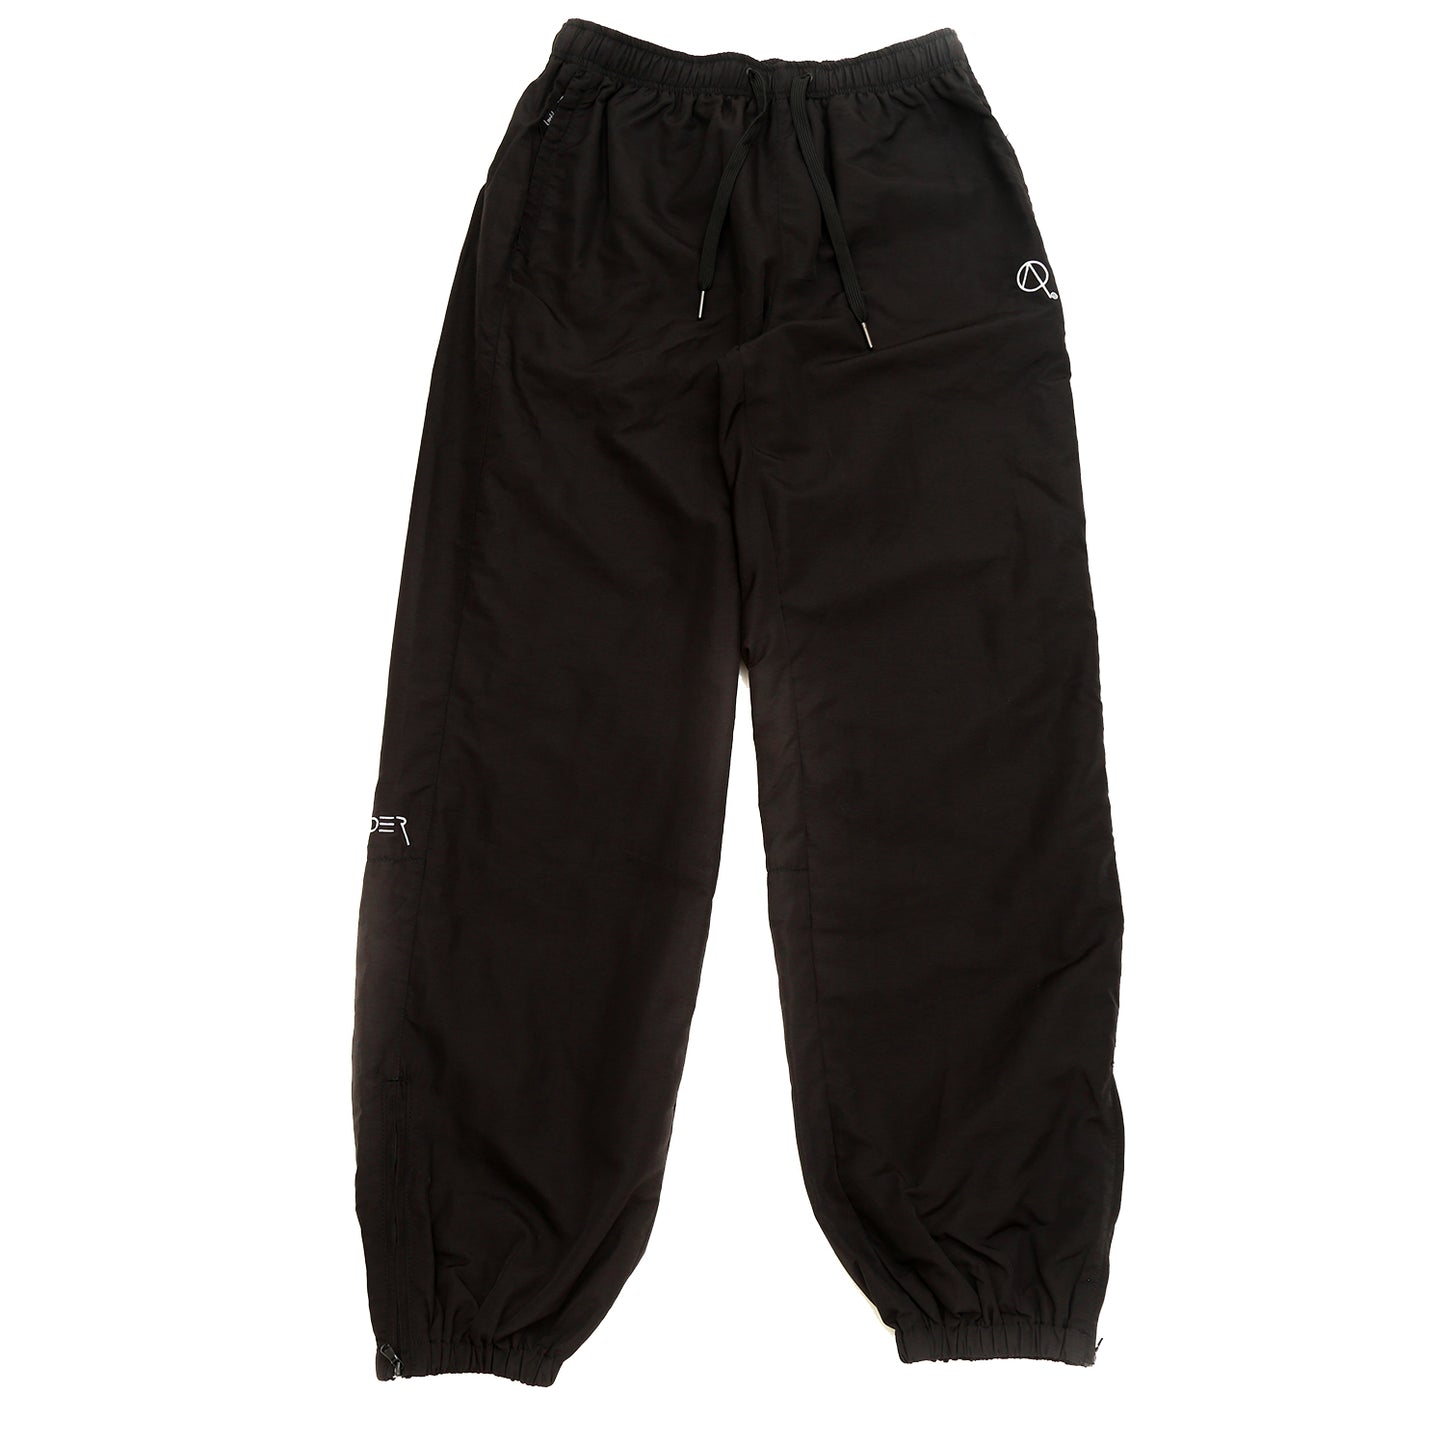 BASECAMP WOVEN TRACK PANT IN BLACK AND WHITE